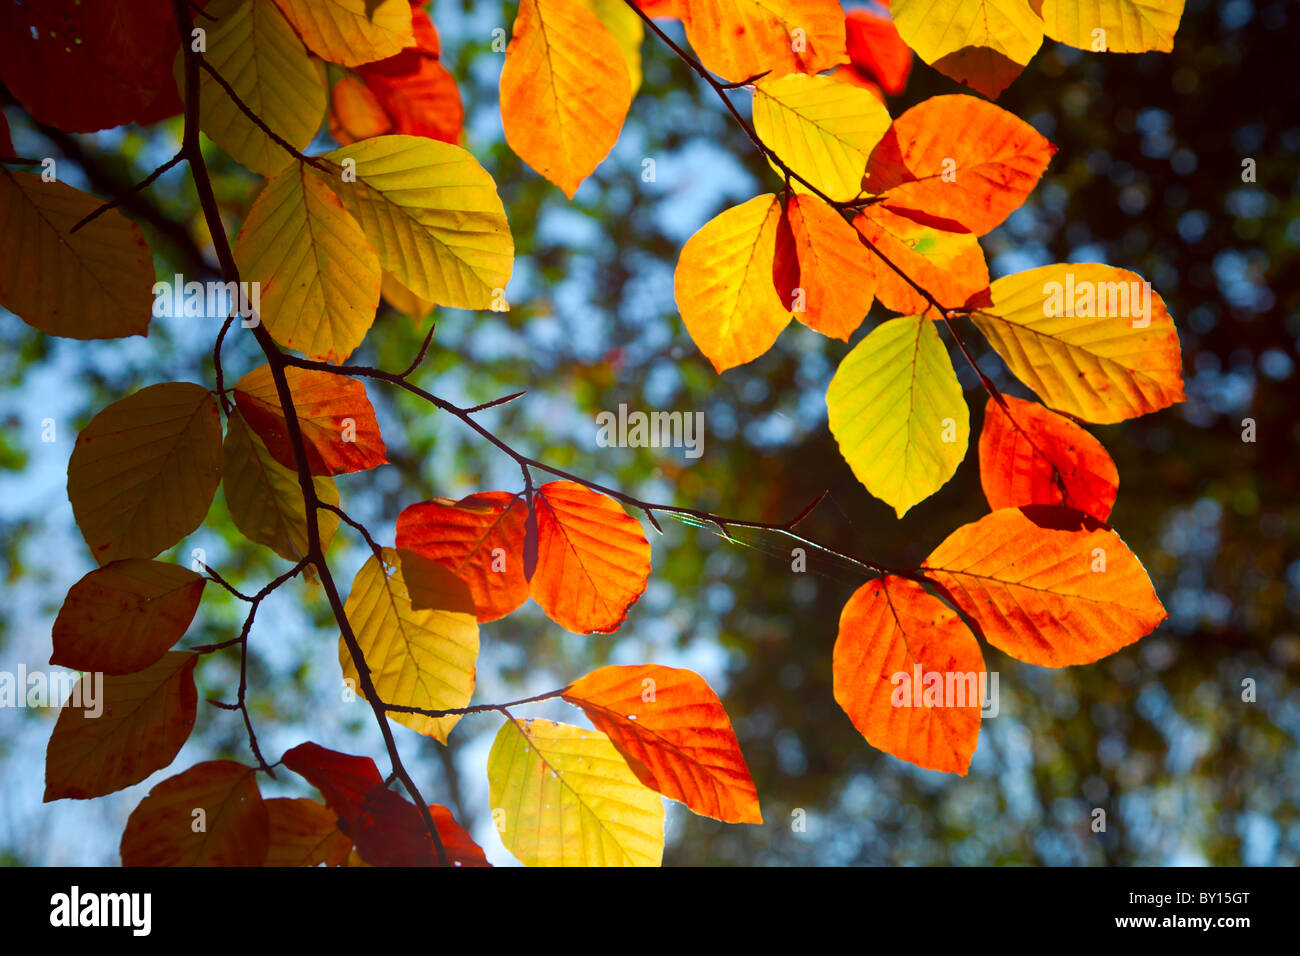 Close-up image of colorful autumn leaves of the Beech tree Fagus sylvatica in an English woodland. Taken looking through the canopy to a blue sky. Stock Photo